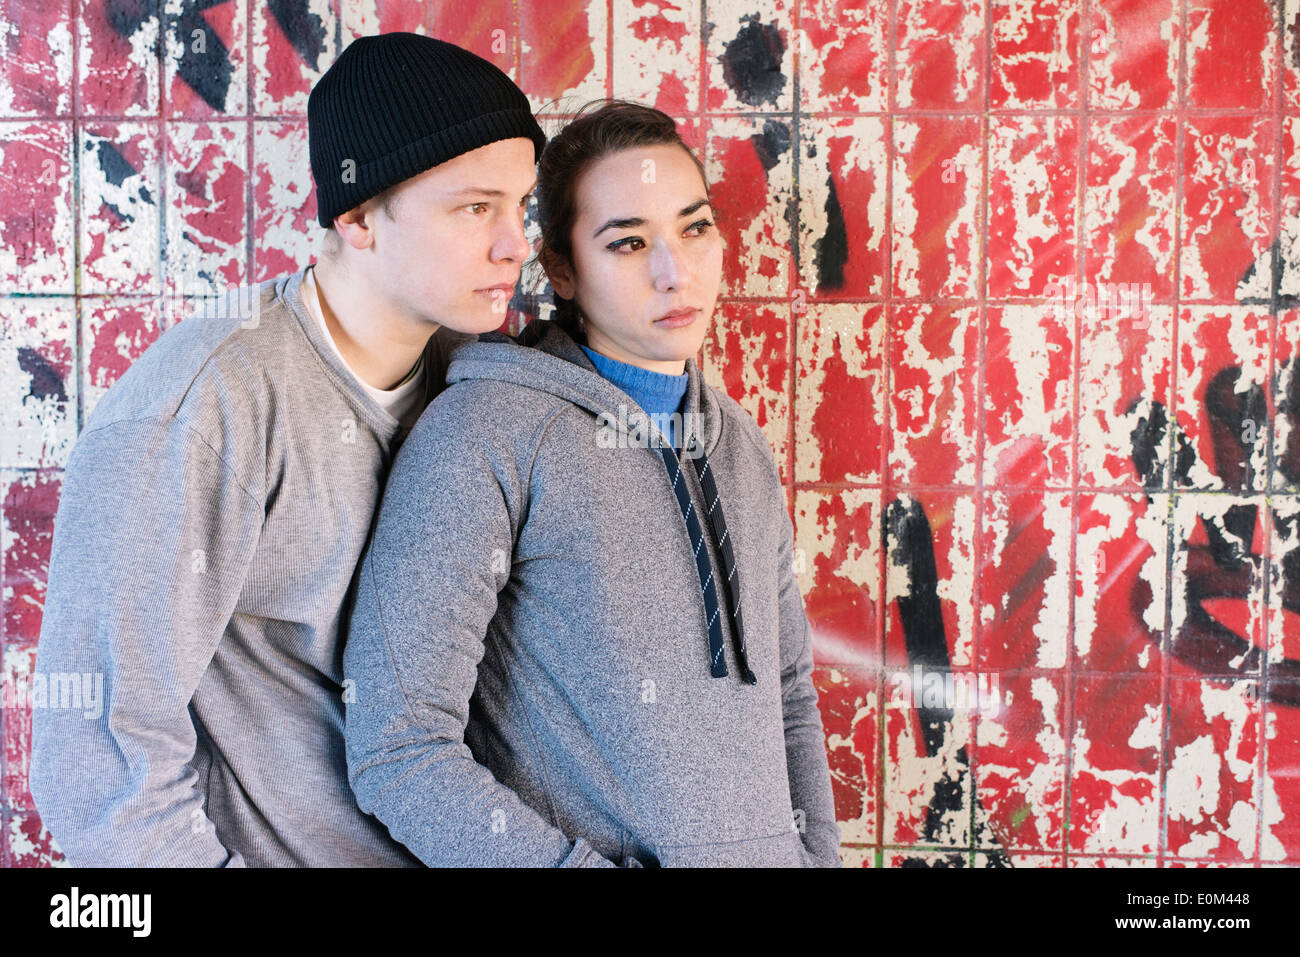 Portrait of casual and relaxed young man and woman waiting in front of grafitti wall in urban area. Stock Photo